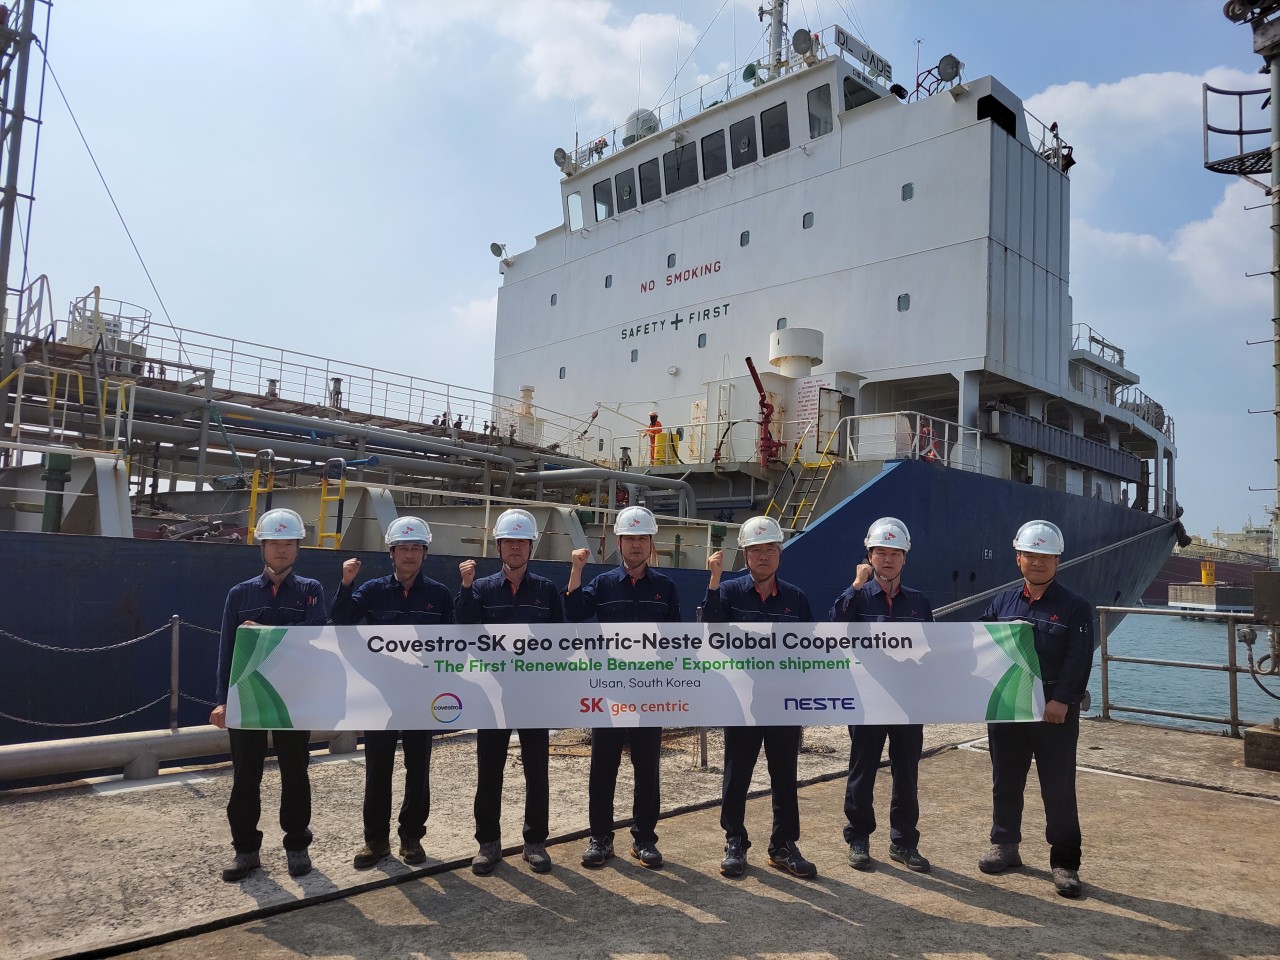 SK Geo Centric employees hold up a banner at the Ulsan CLX SK Port on June 14 marking the first shipment of renewable benzene to Covestro factories in China. (SK Geo Centric)